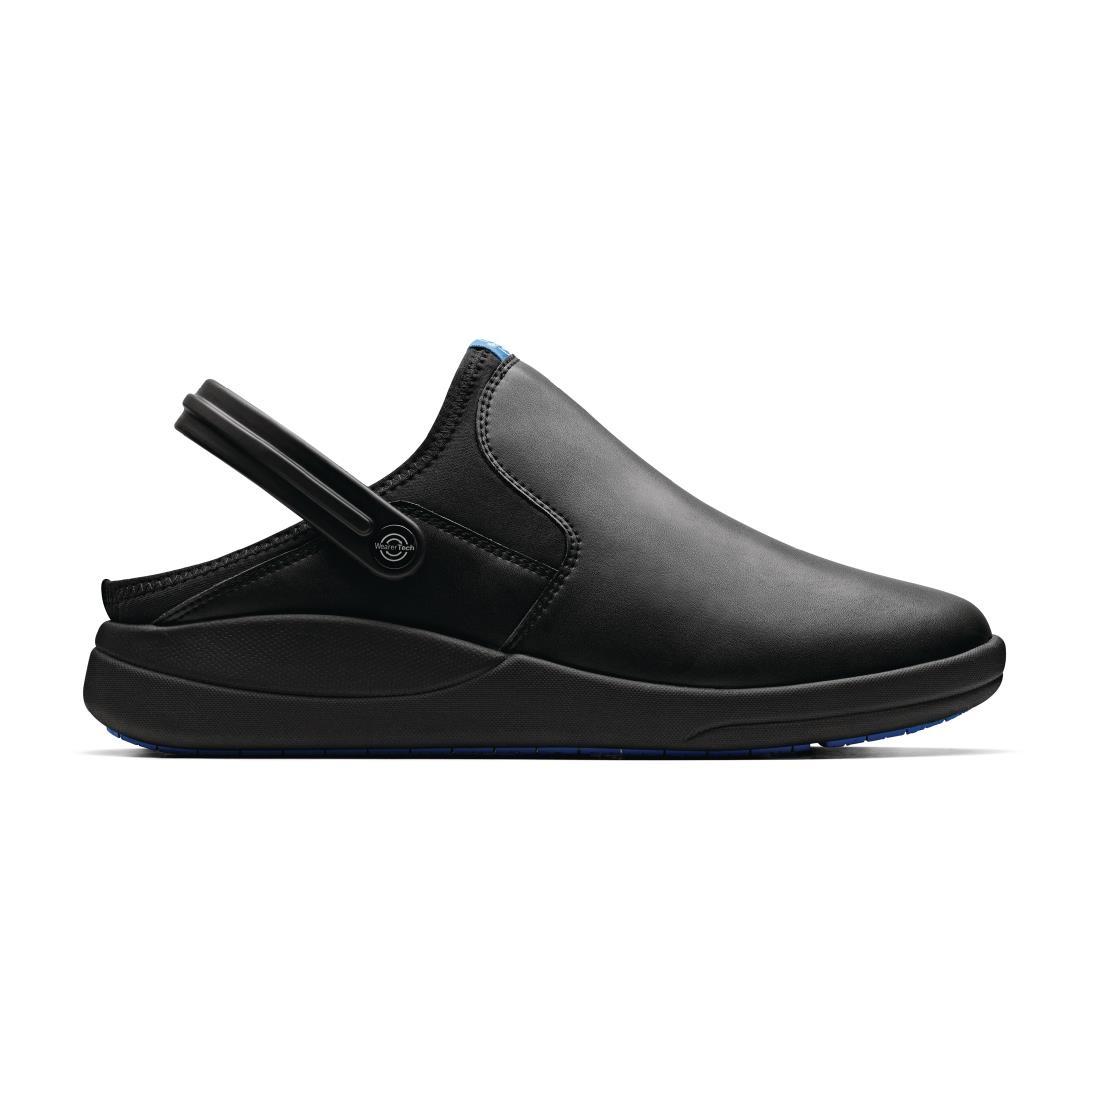 WearerTech Refresh Clog Black with Firm Insoles Size 36 - BB556-3  - 3